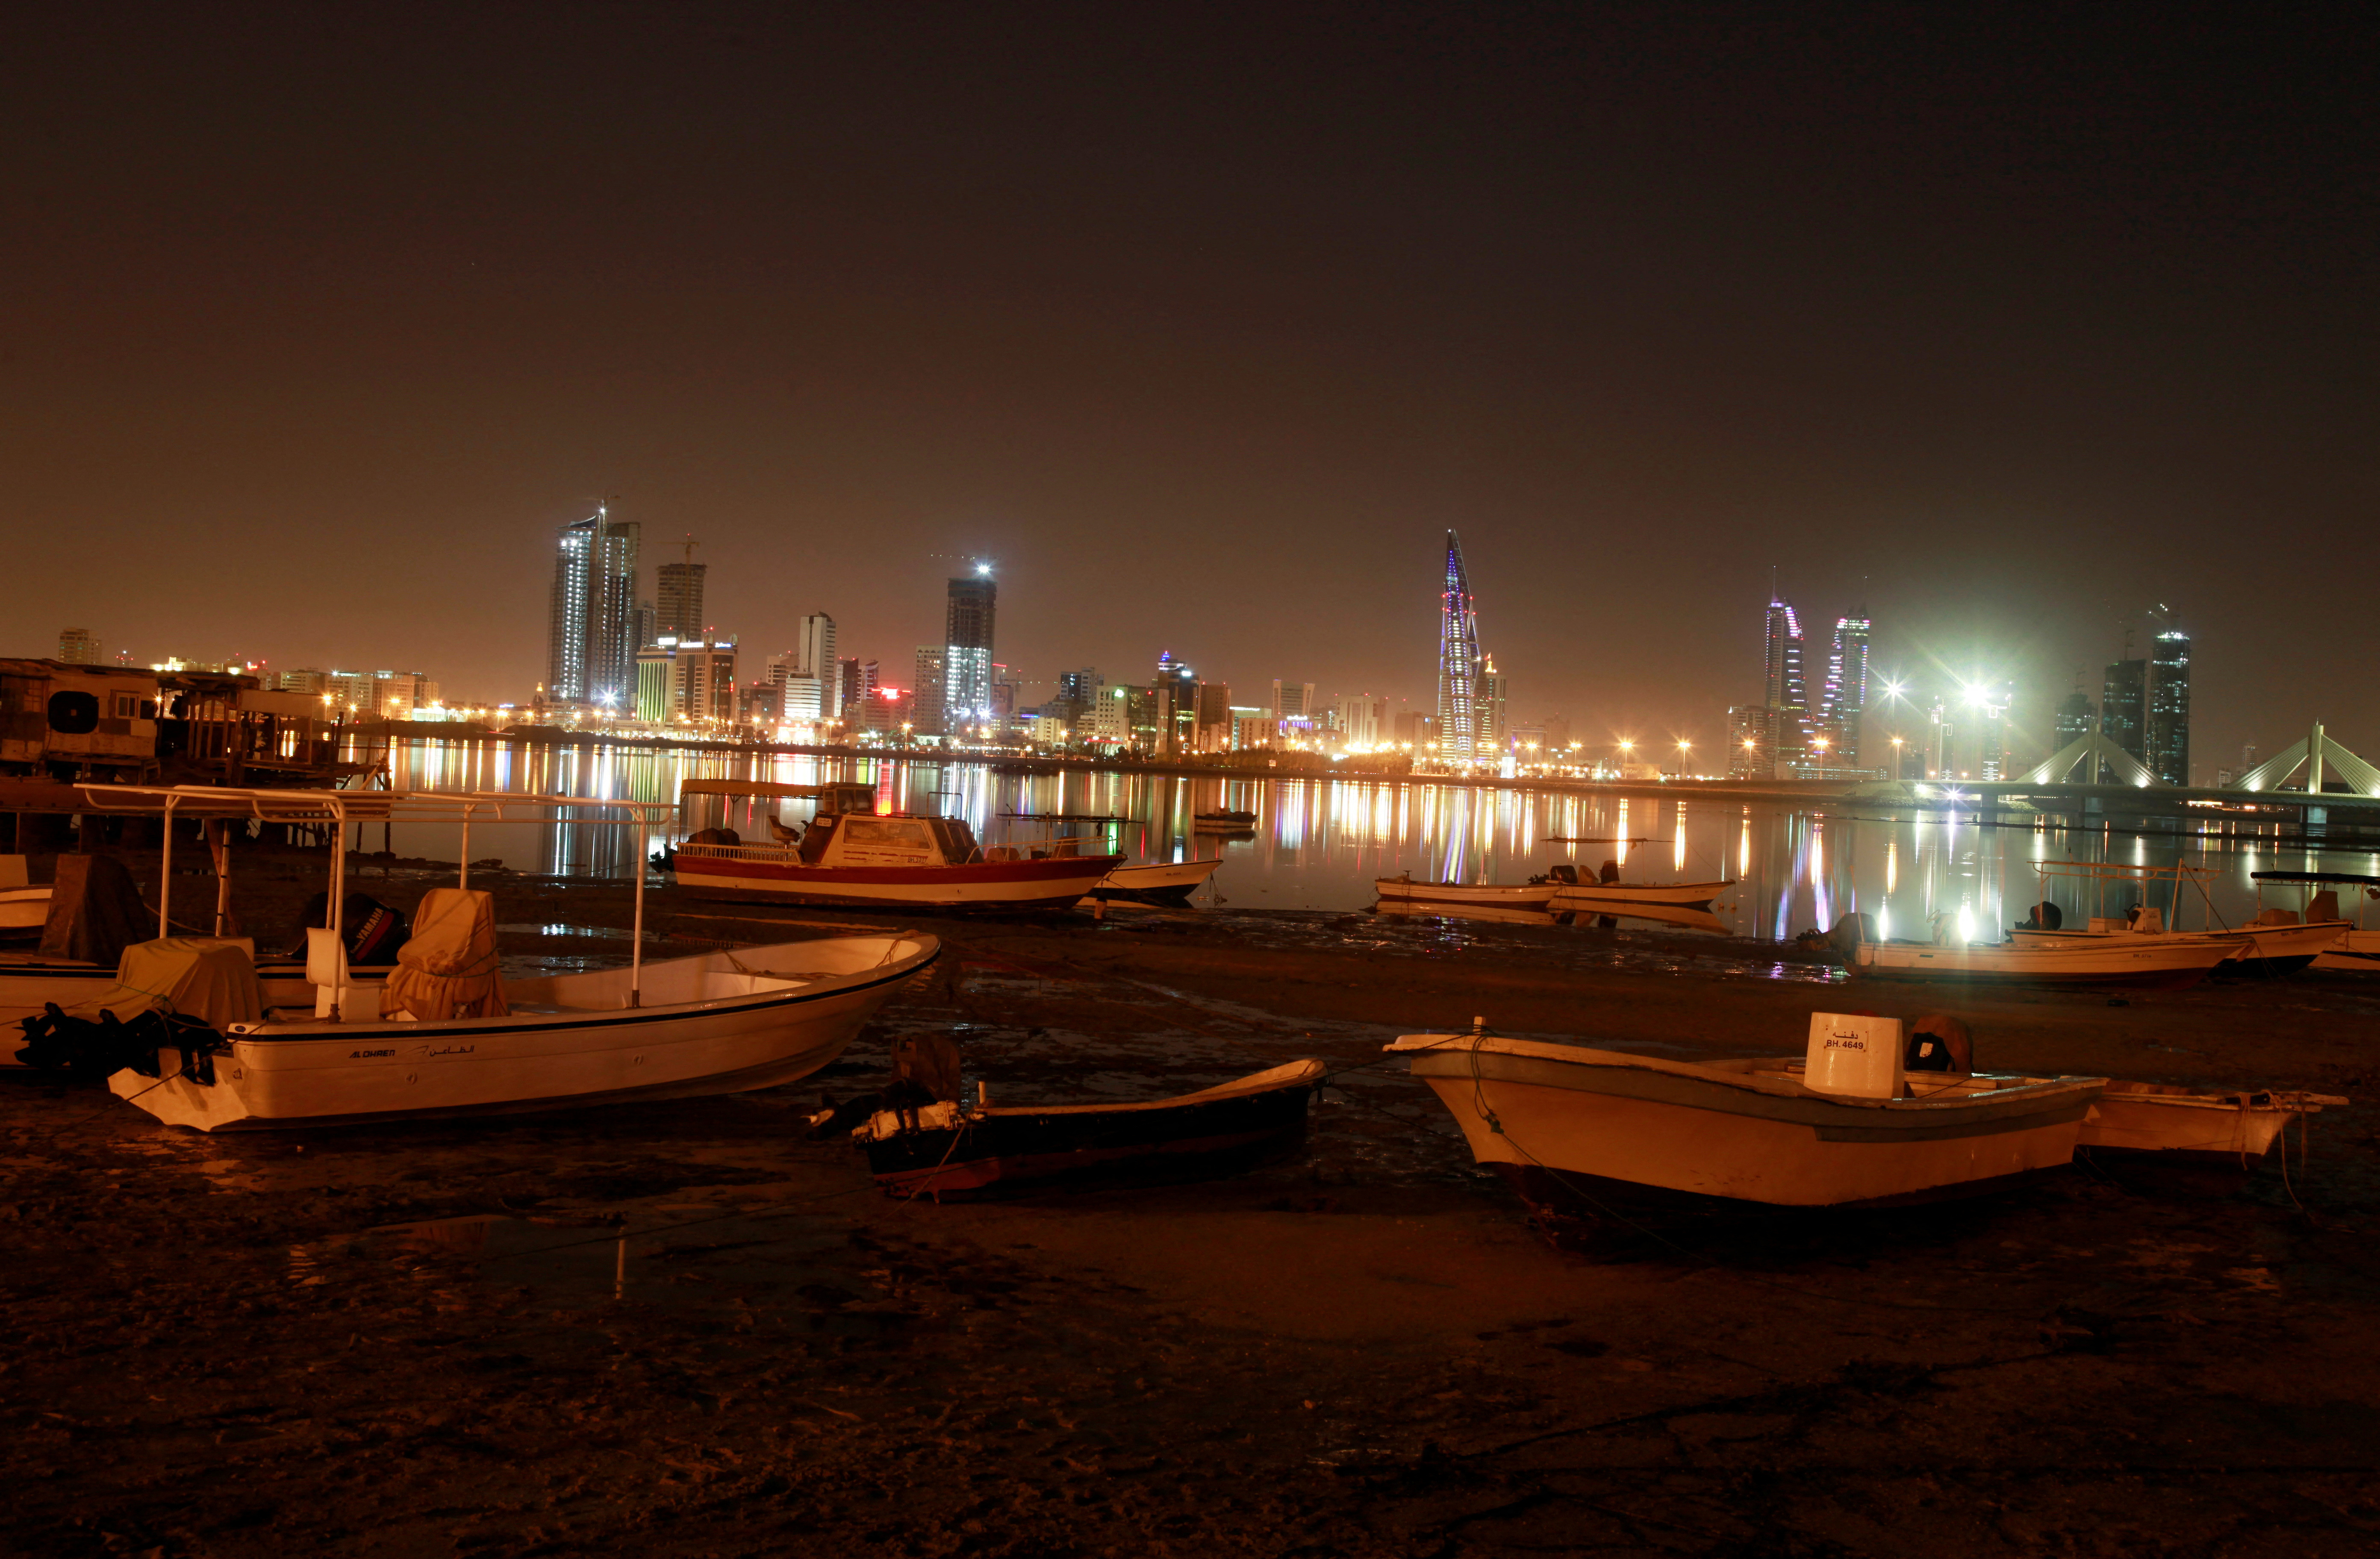 Boats are seen in Manama